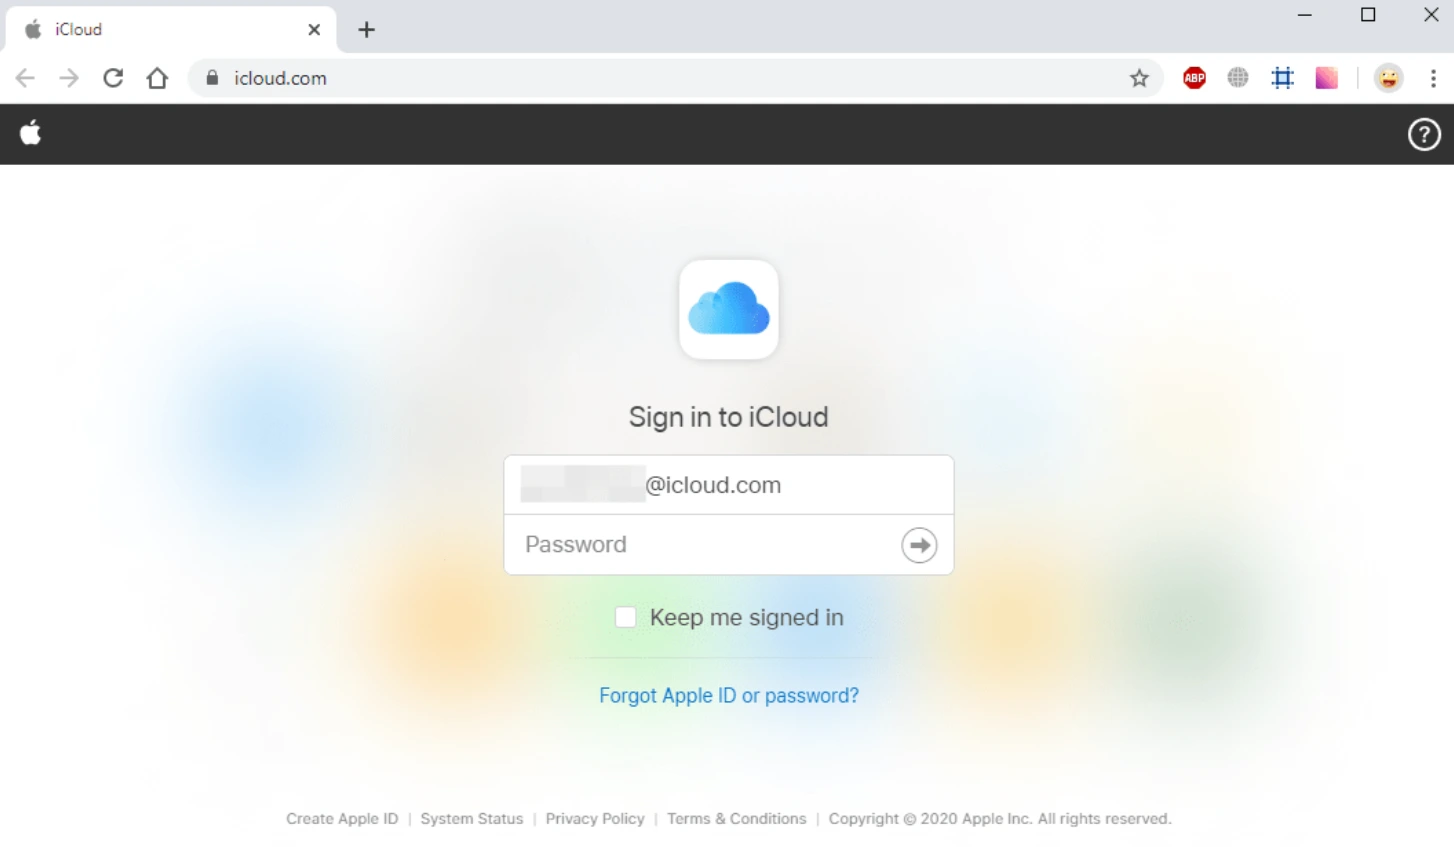 sign in to iCloud through a web browser